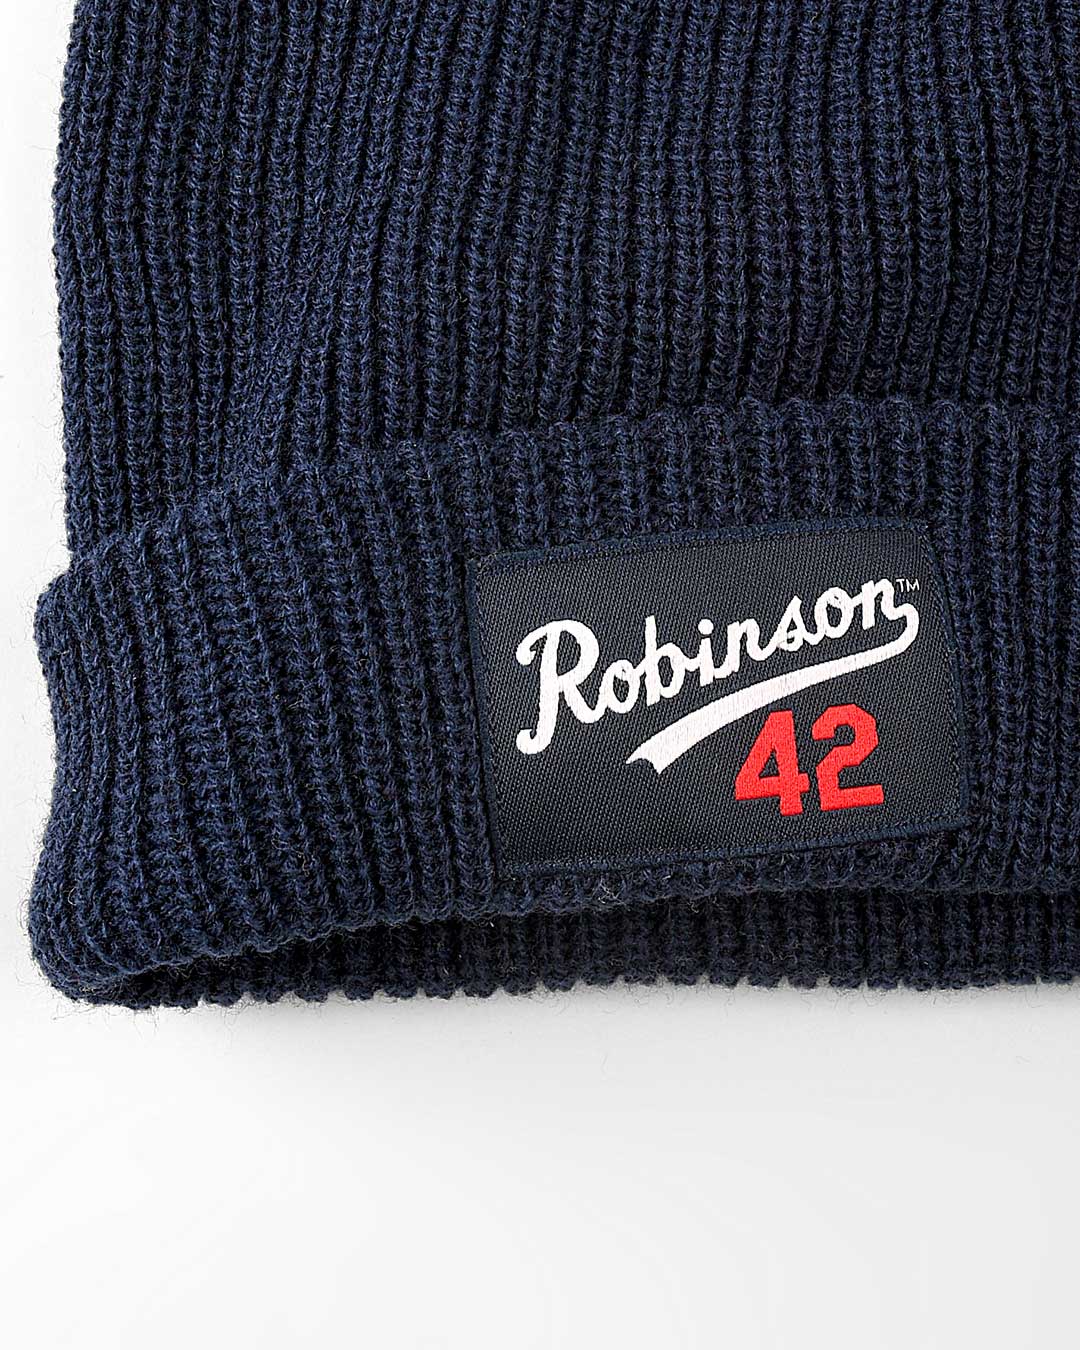 Robinson #42 Navy Beanie - Roots of Fight Canada